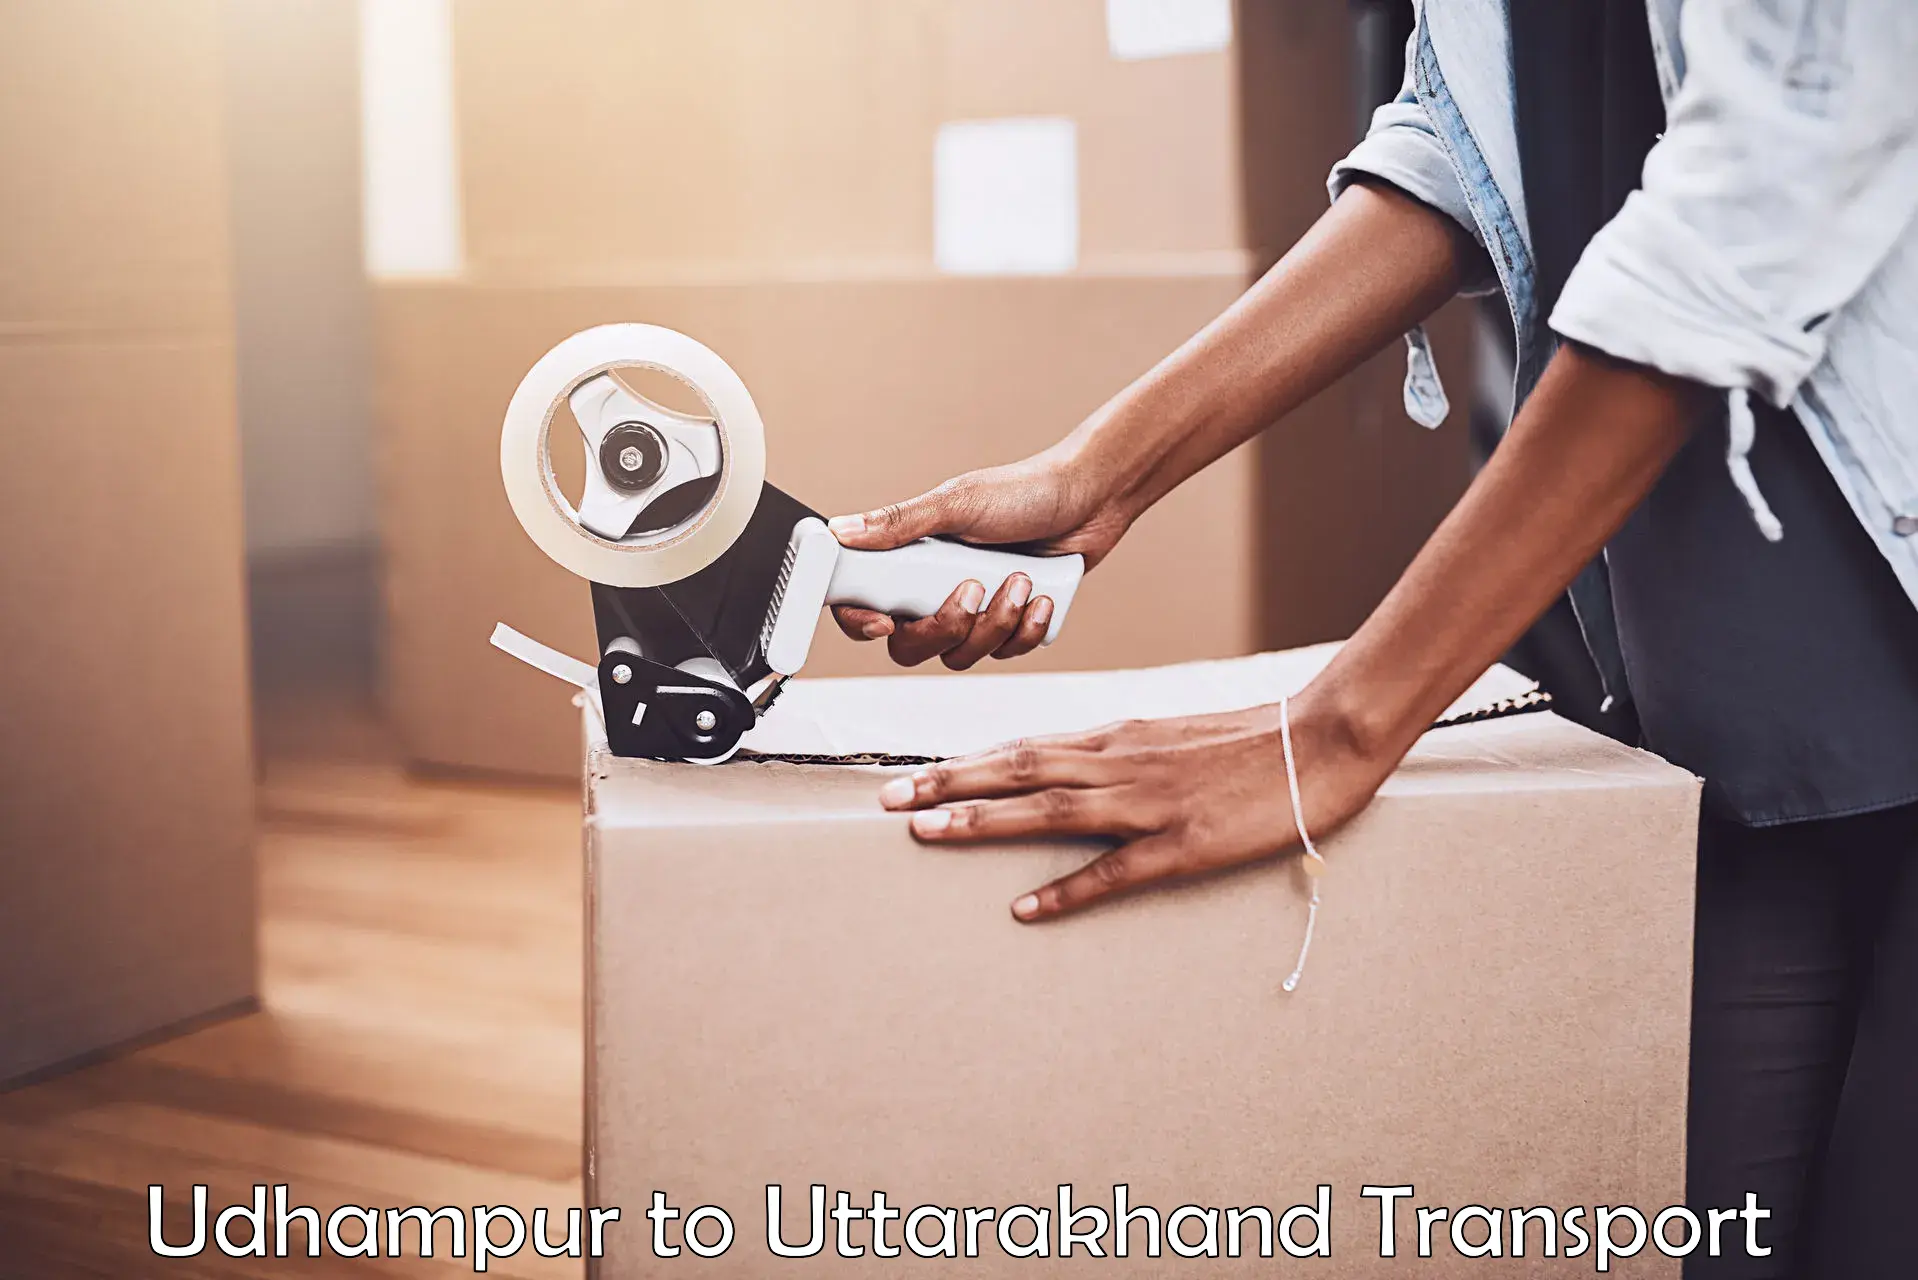 Truck transport companies in India Udhampur to Pauri Garhwal